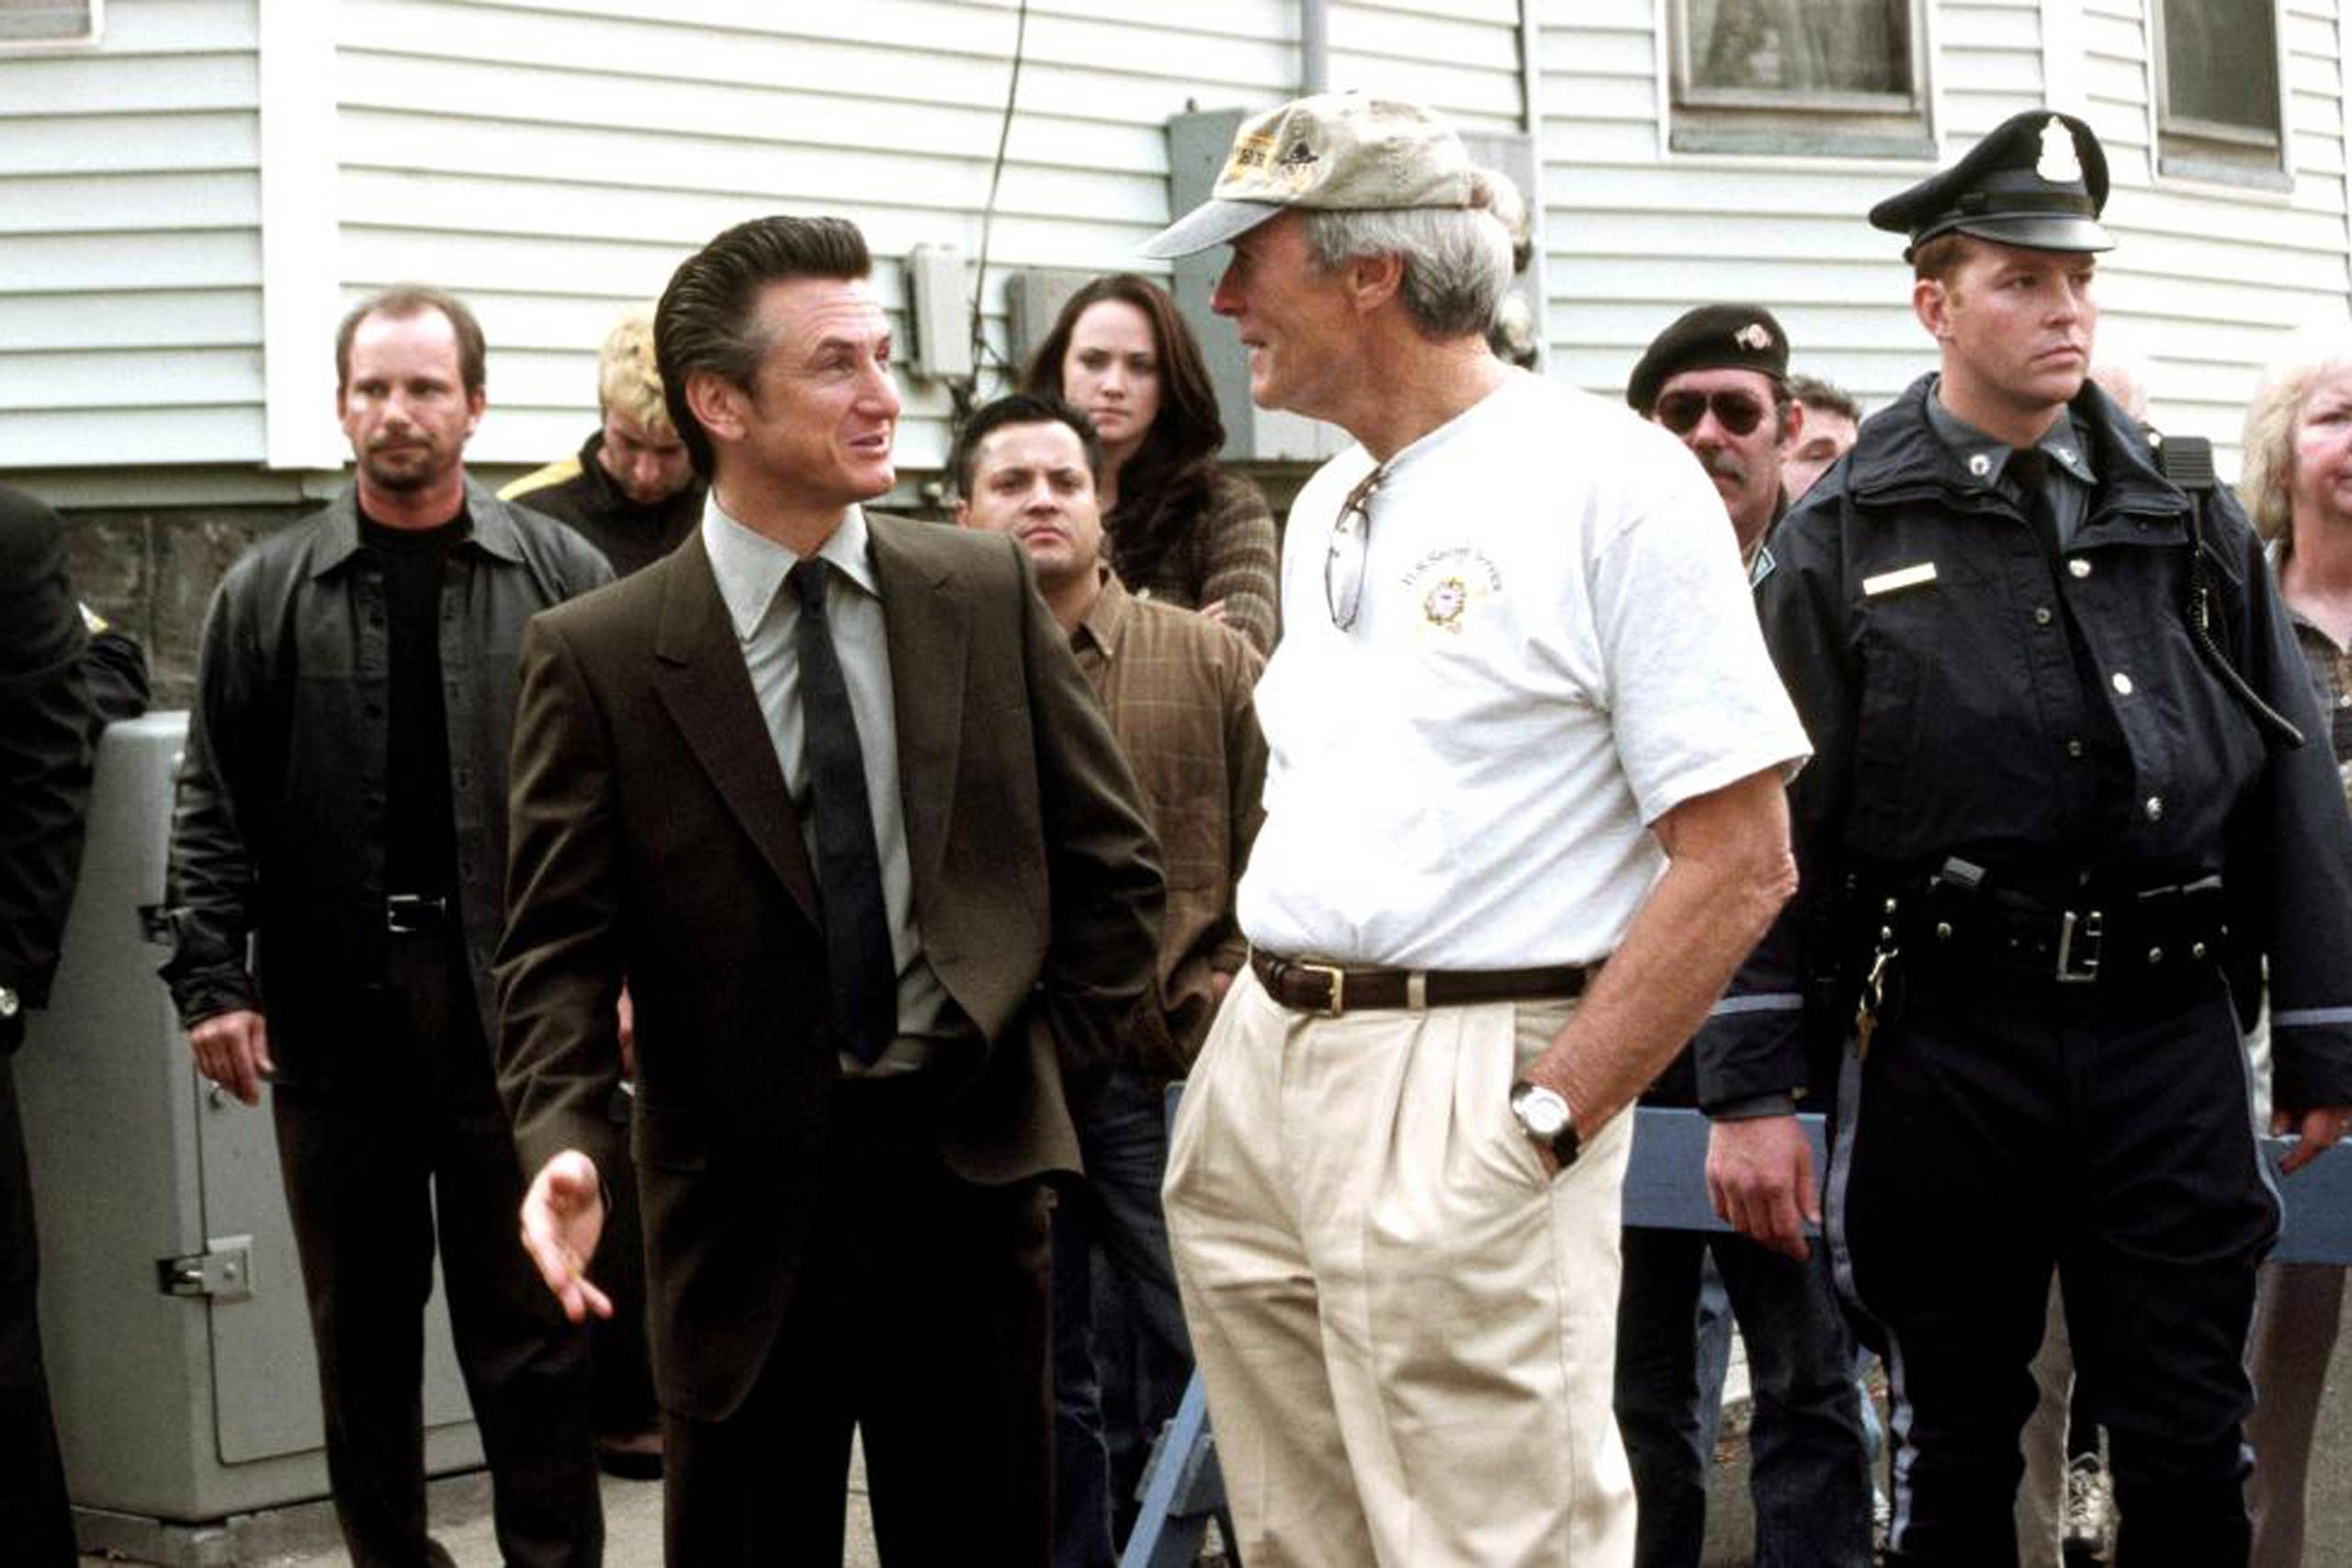 Mystic River, 2003 He directed but did not appear in the movie of Dennis Lehane's novel about Boston family values. Sean Penn, ostensibly the least likely actor to get along with Eastwood, famously did, as did the rest of the ensemble.  Clint is the approving rascal, older-brother father,  Penn told TIME's Desa Philadelphia.  You are not inclined toward useless rebellion with him, unless you just want to see him laugh at you.  On Oscar Night there were smiles all around: Best Actor for Penn and Supporting Actor for Tim Robbins, plus nominations for Picture, Director (Eastwood), Screenplay (Brian Helgeland) and Supporting Actress (Marcia Gay Harden).